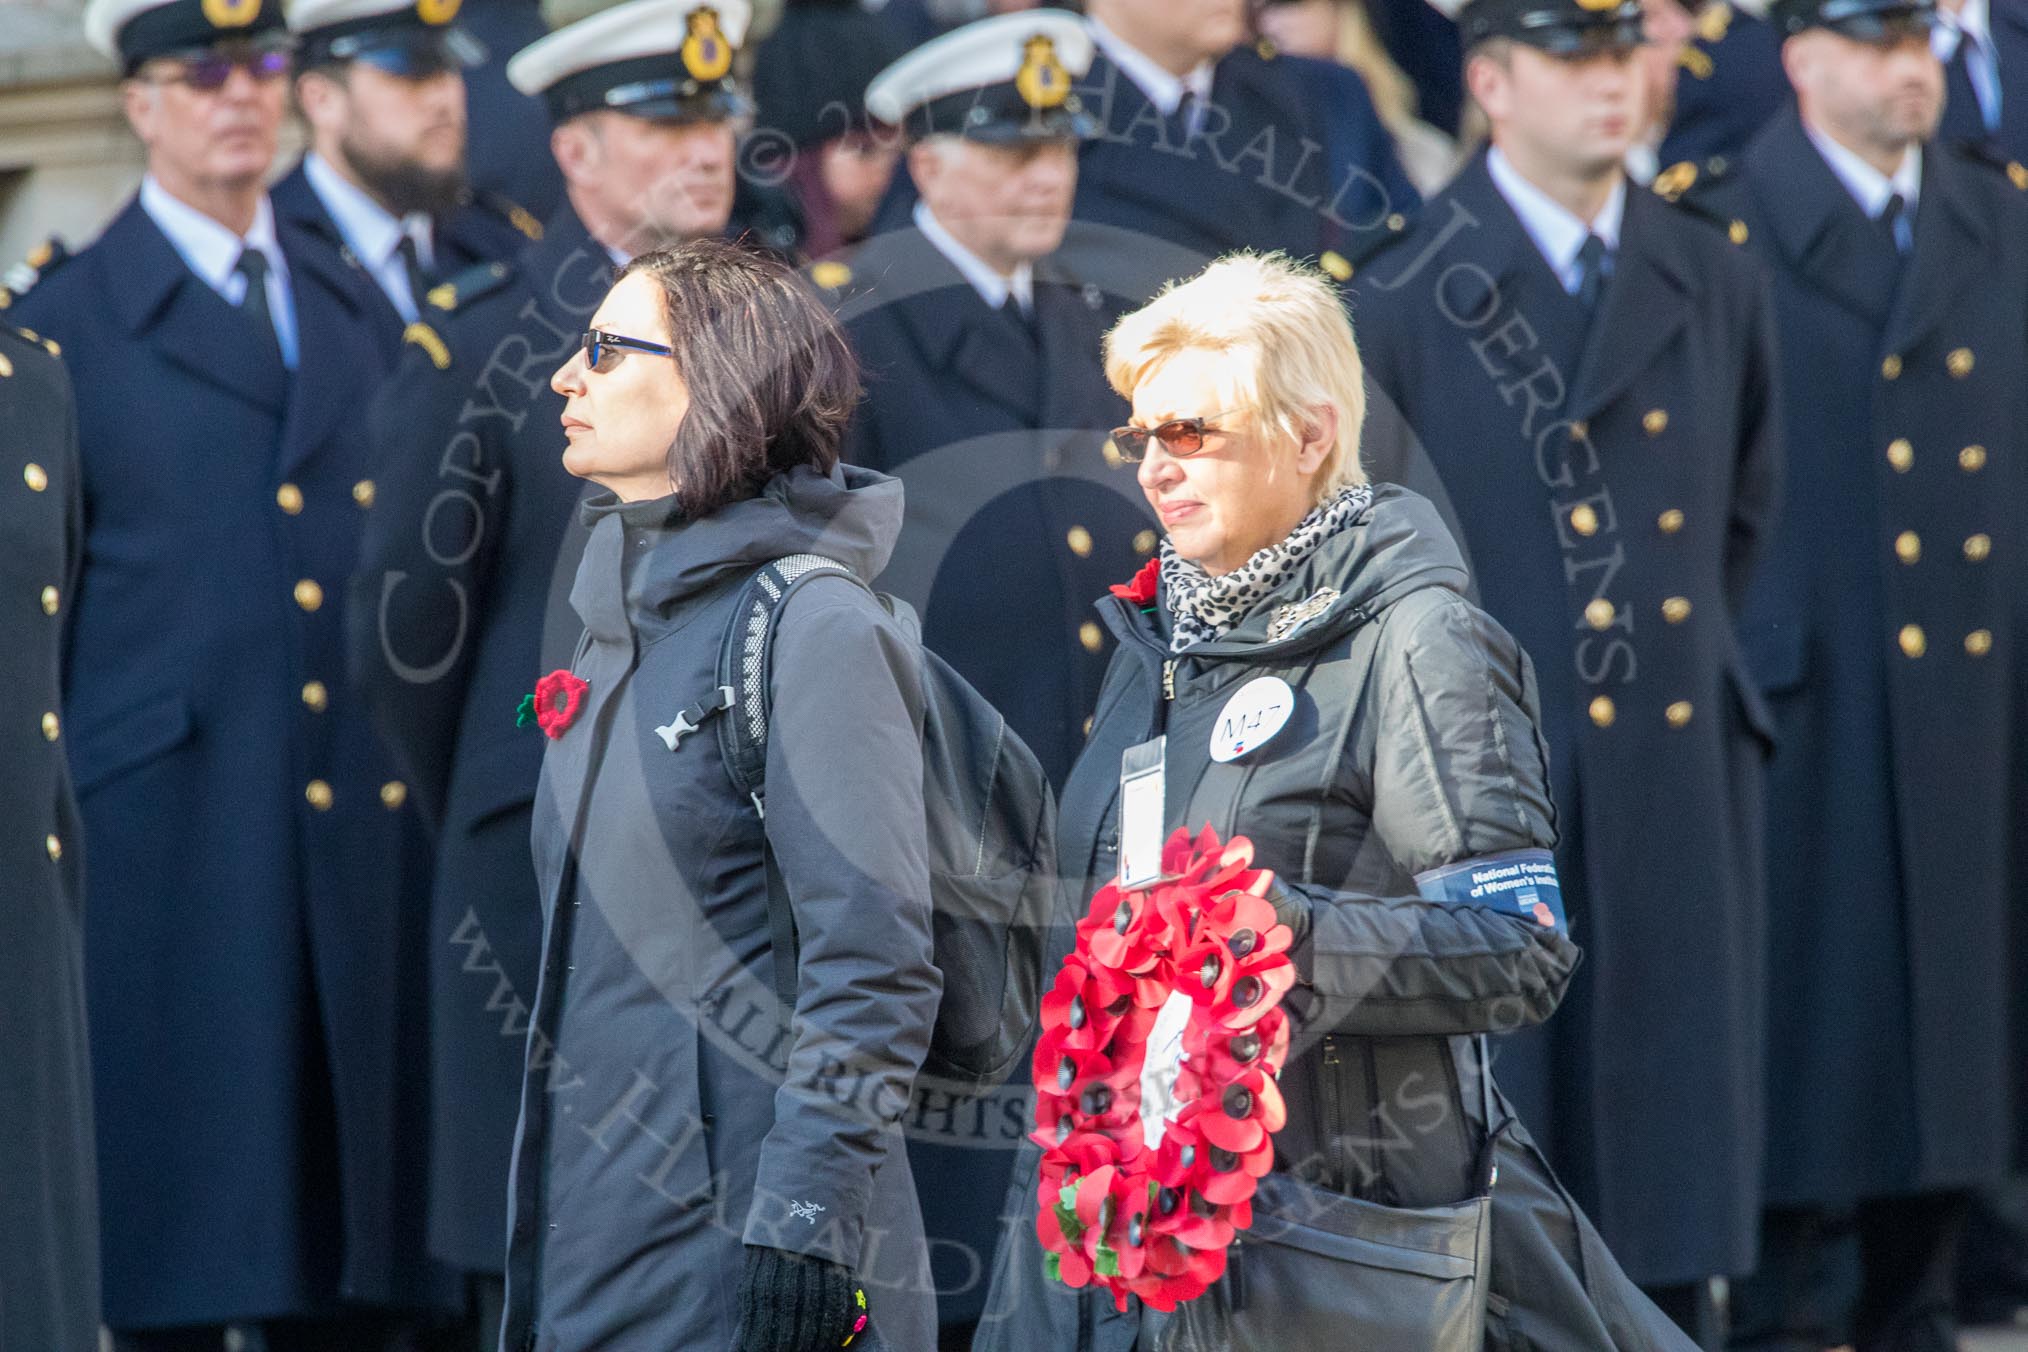 The NFWI - National Federation of Women's Institutes (Group M47, 4 members) during the Royal British Legion March Past on Remembrance Sunday at the Cenotaph, Whitehall, Westminster, London, 11 November 2018, 12:31.